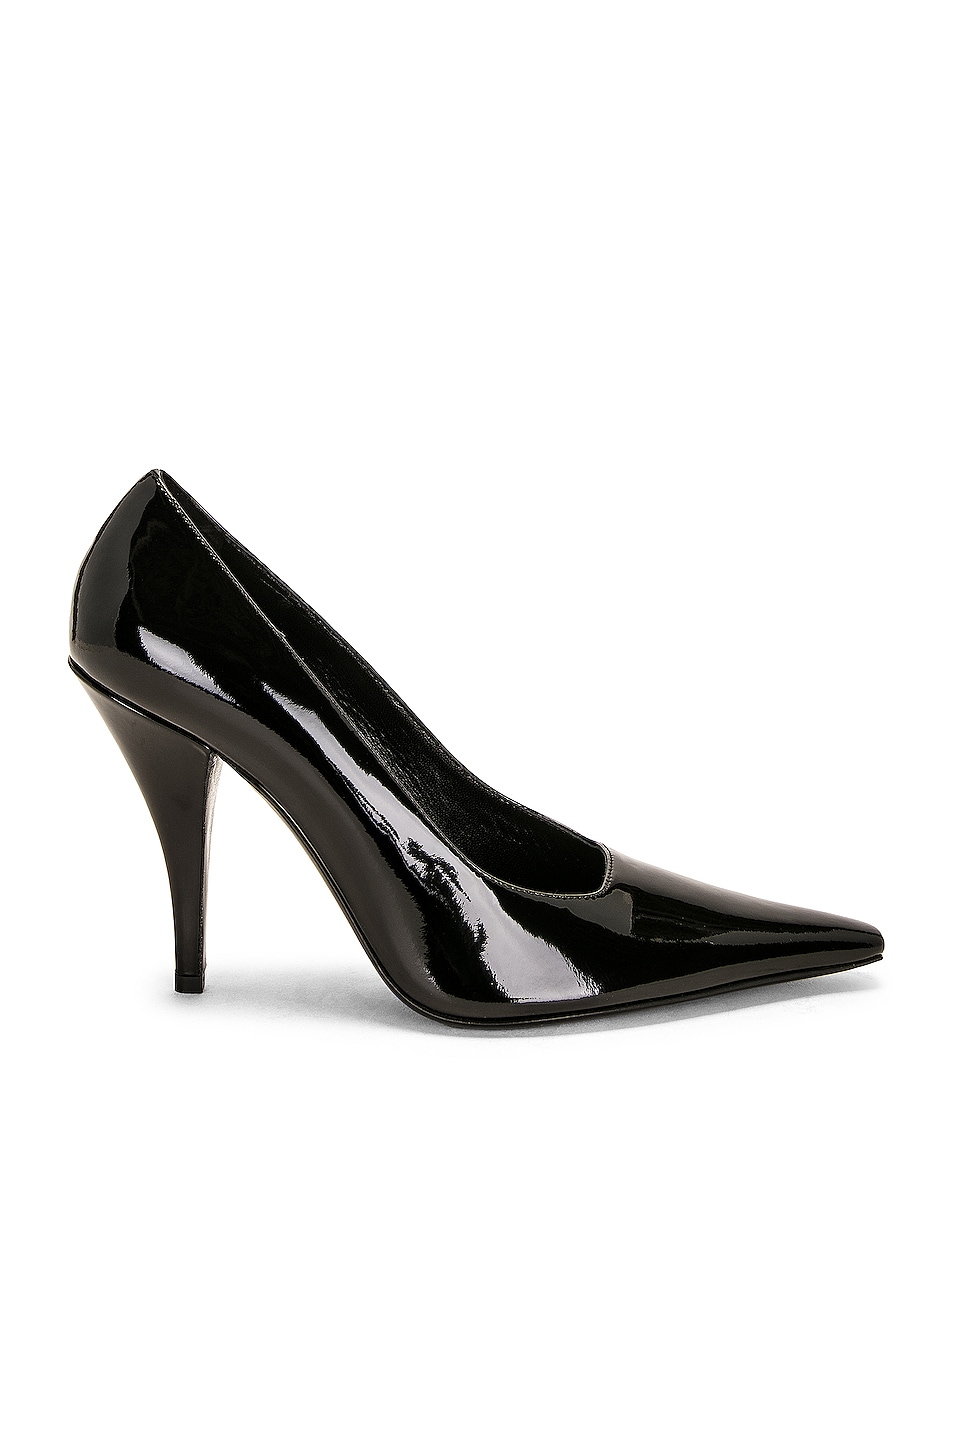 Image 1 of The Row Lana Pump in Black